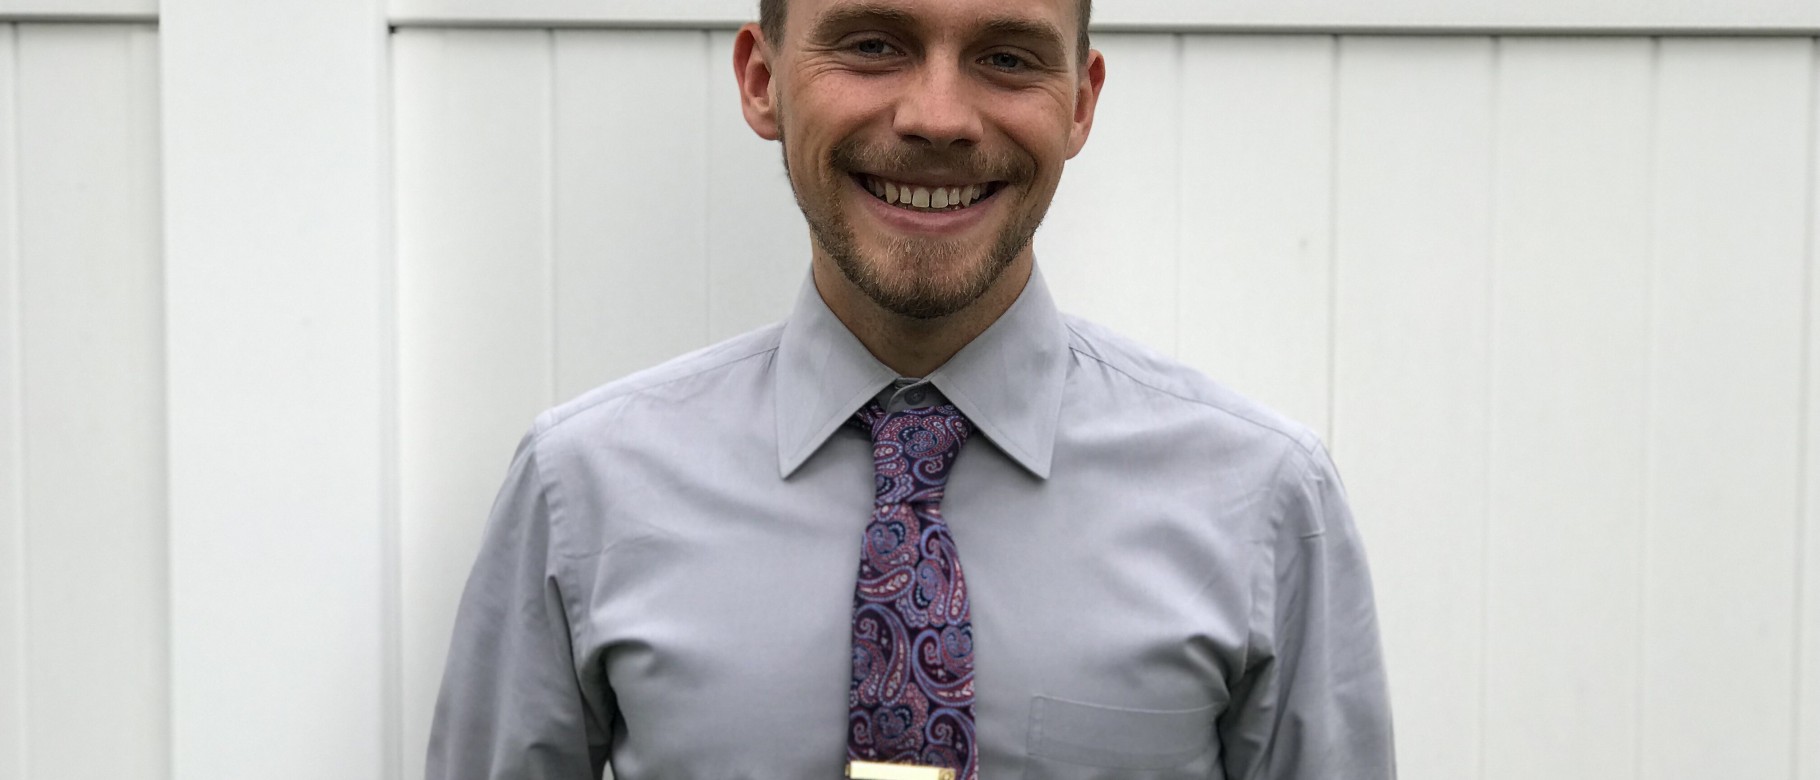 A study co-authored by student Logan Wilson was published in the June issue of The Journal of Evidence-Based Dental Practice